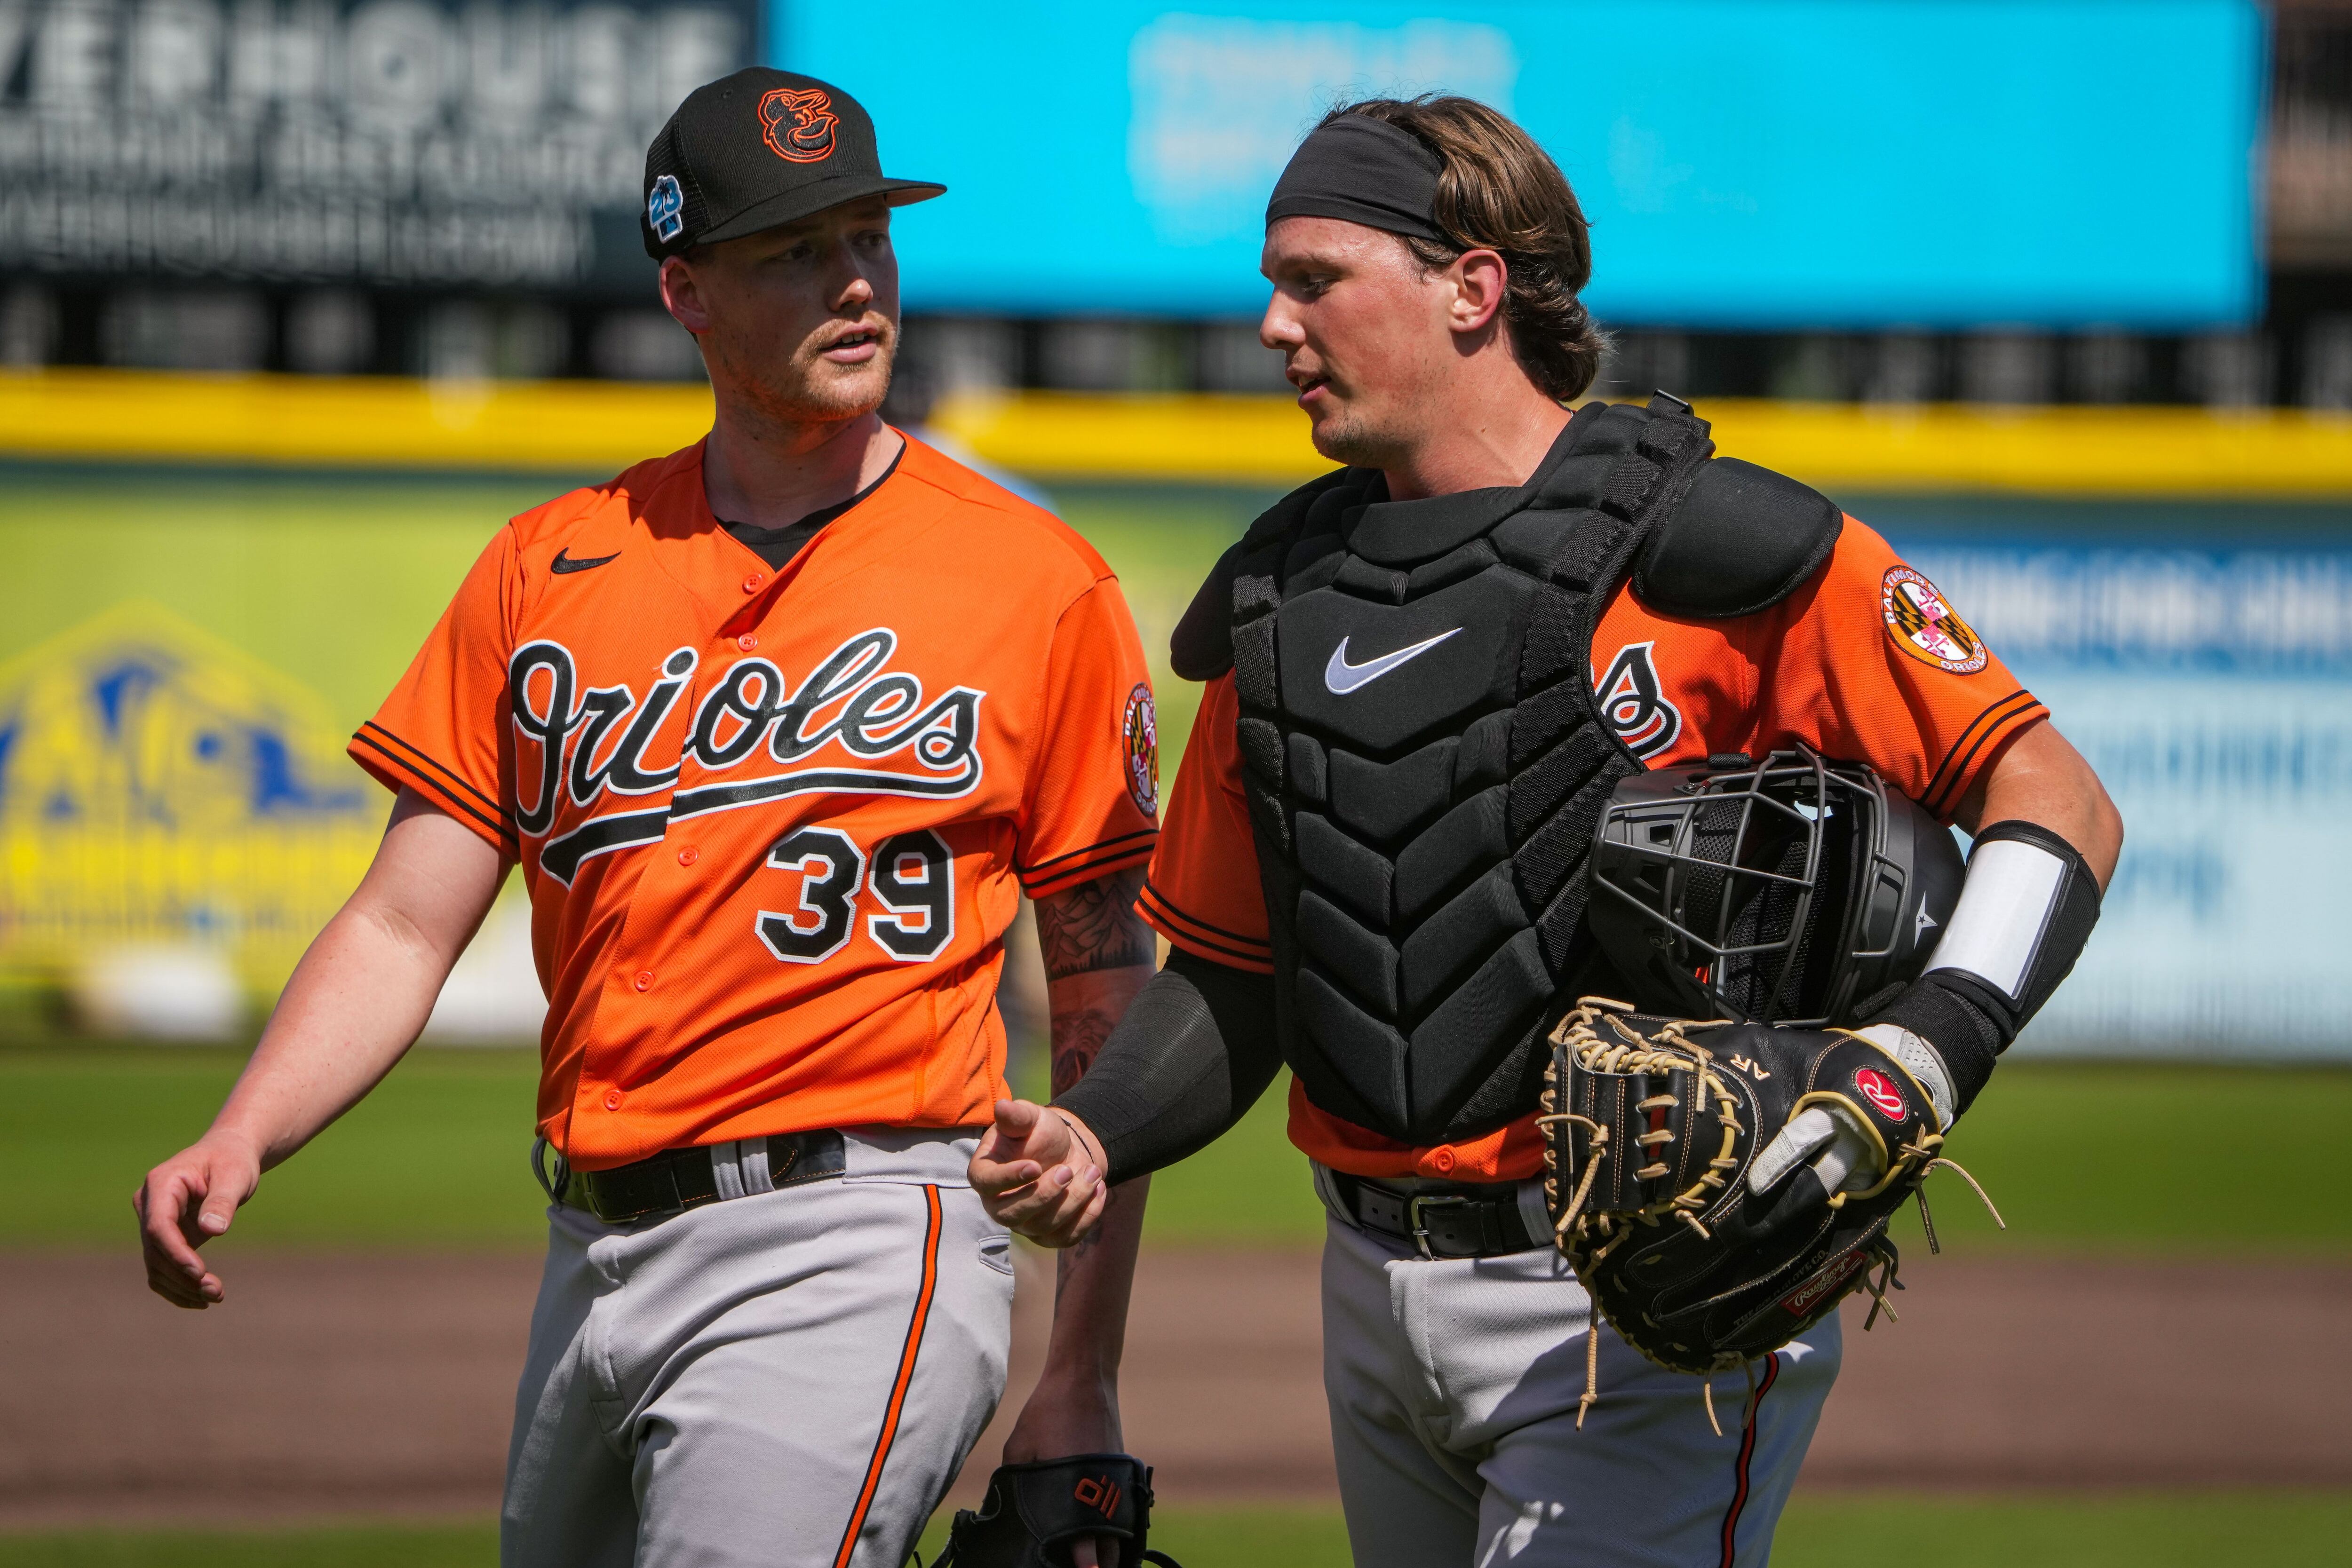 Comparing the current and opening day rosters for the Orioles